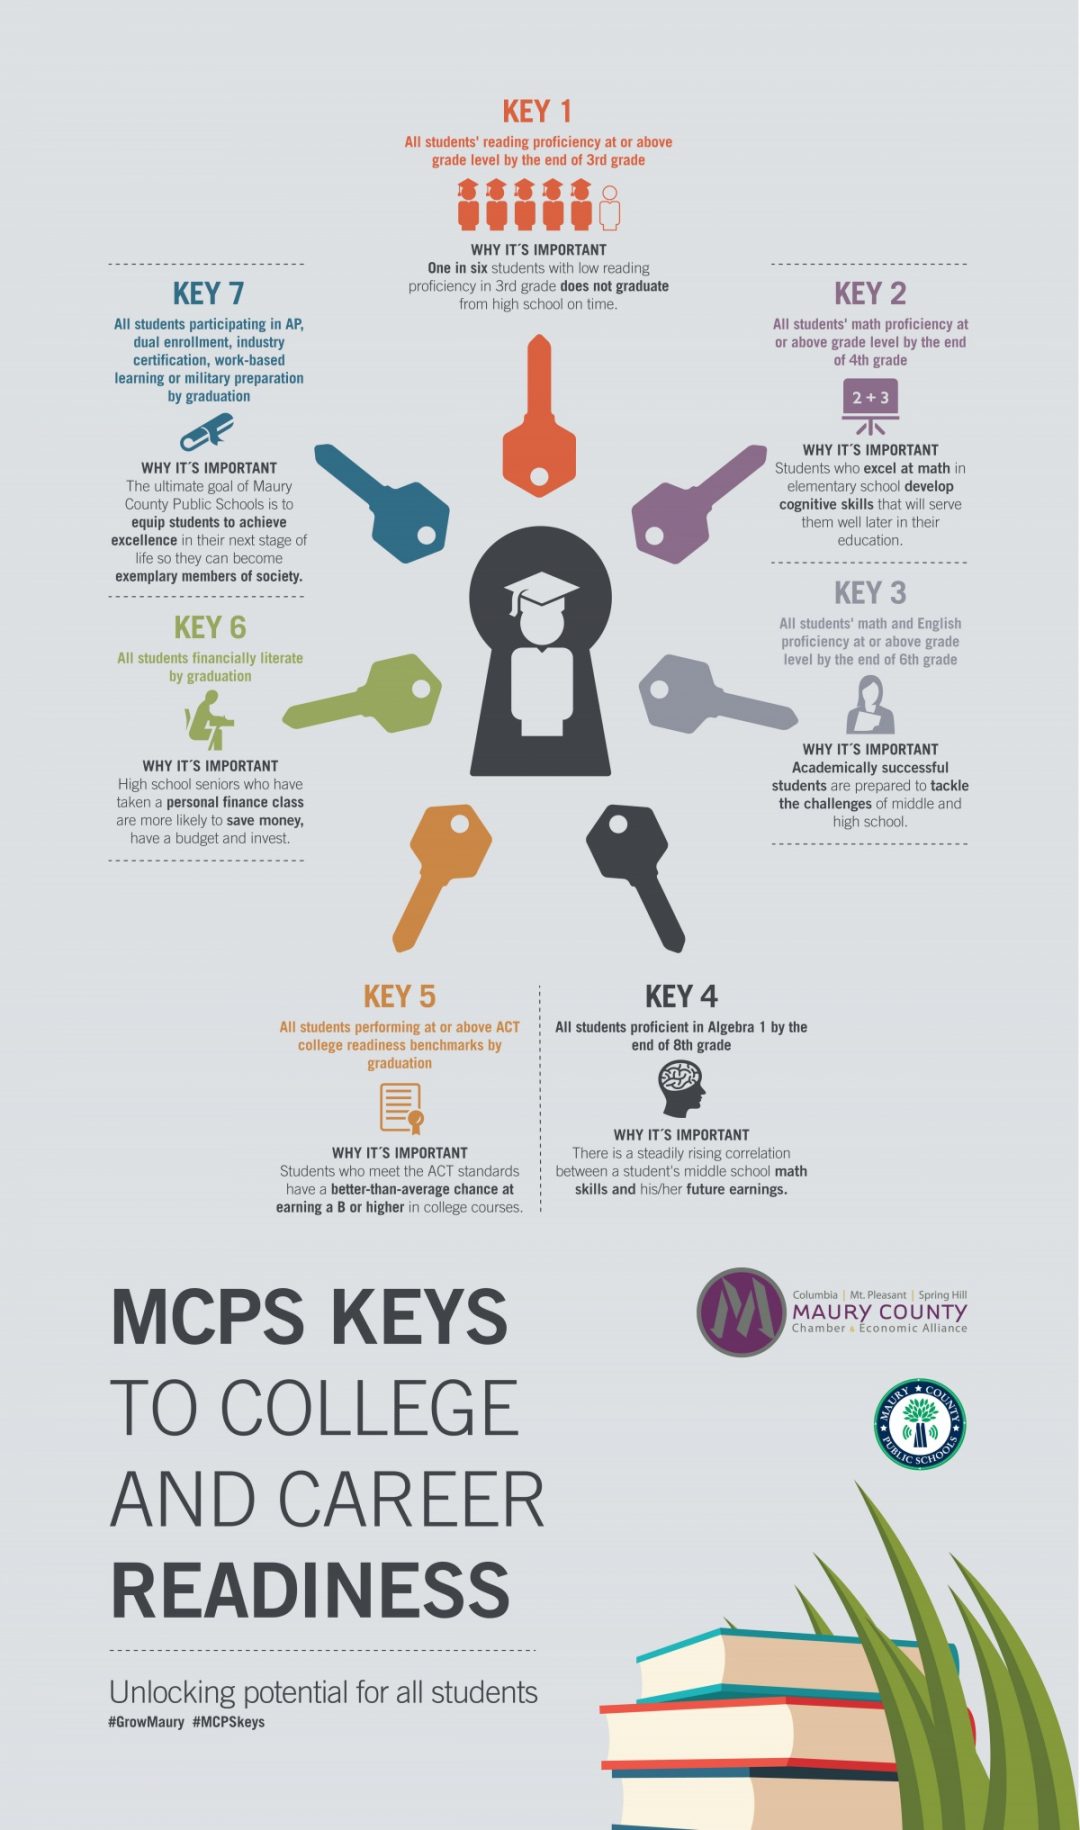 Maury County Schools-7 keys to college and career readiness MCPSkeys-web